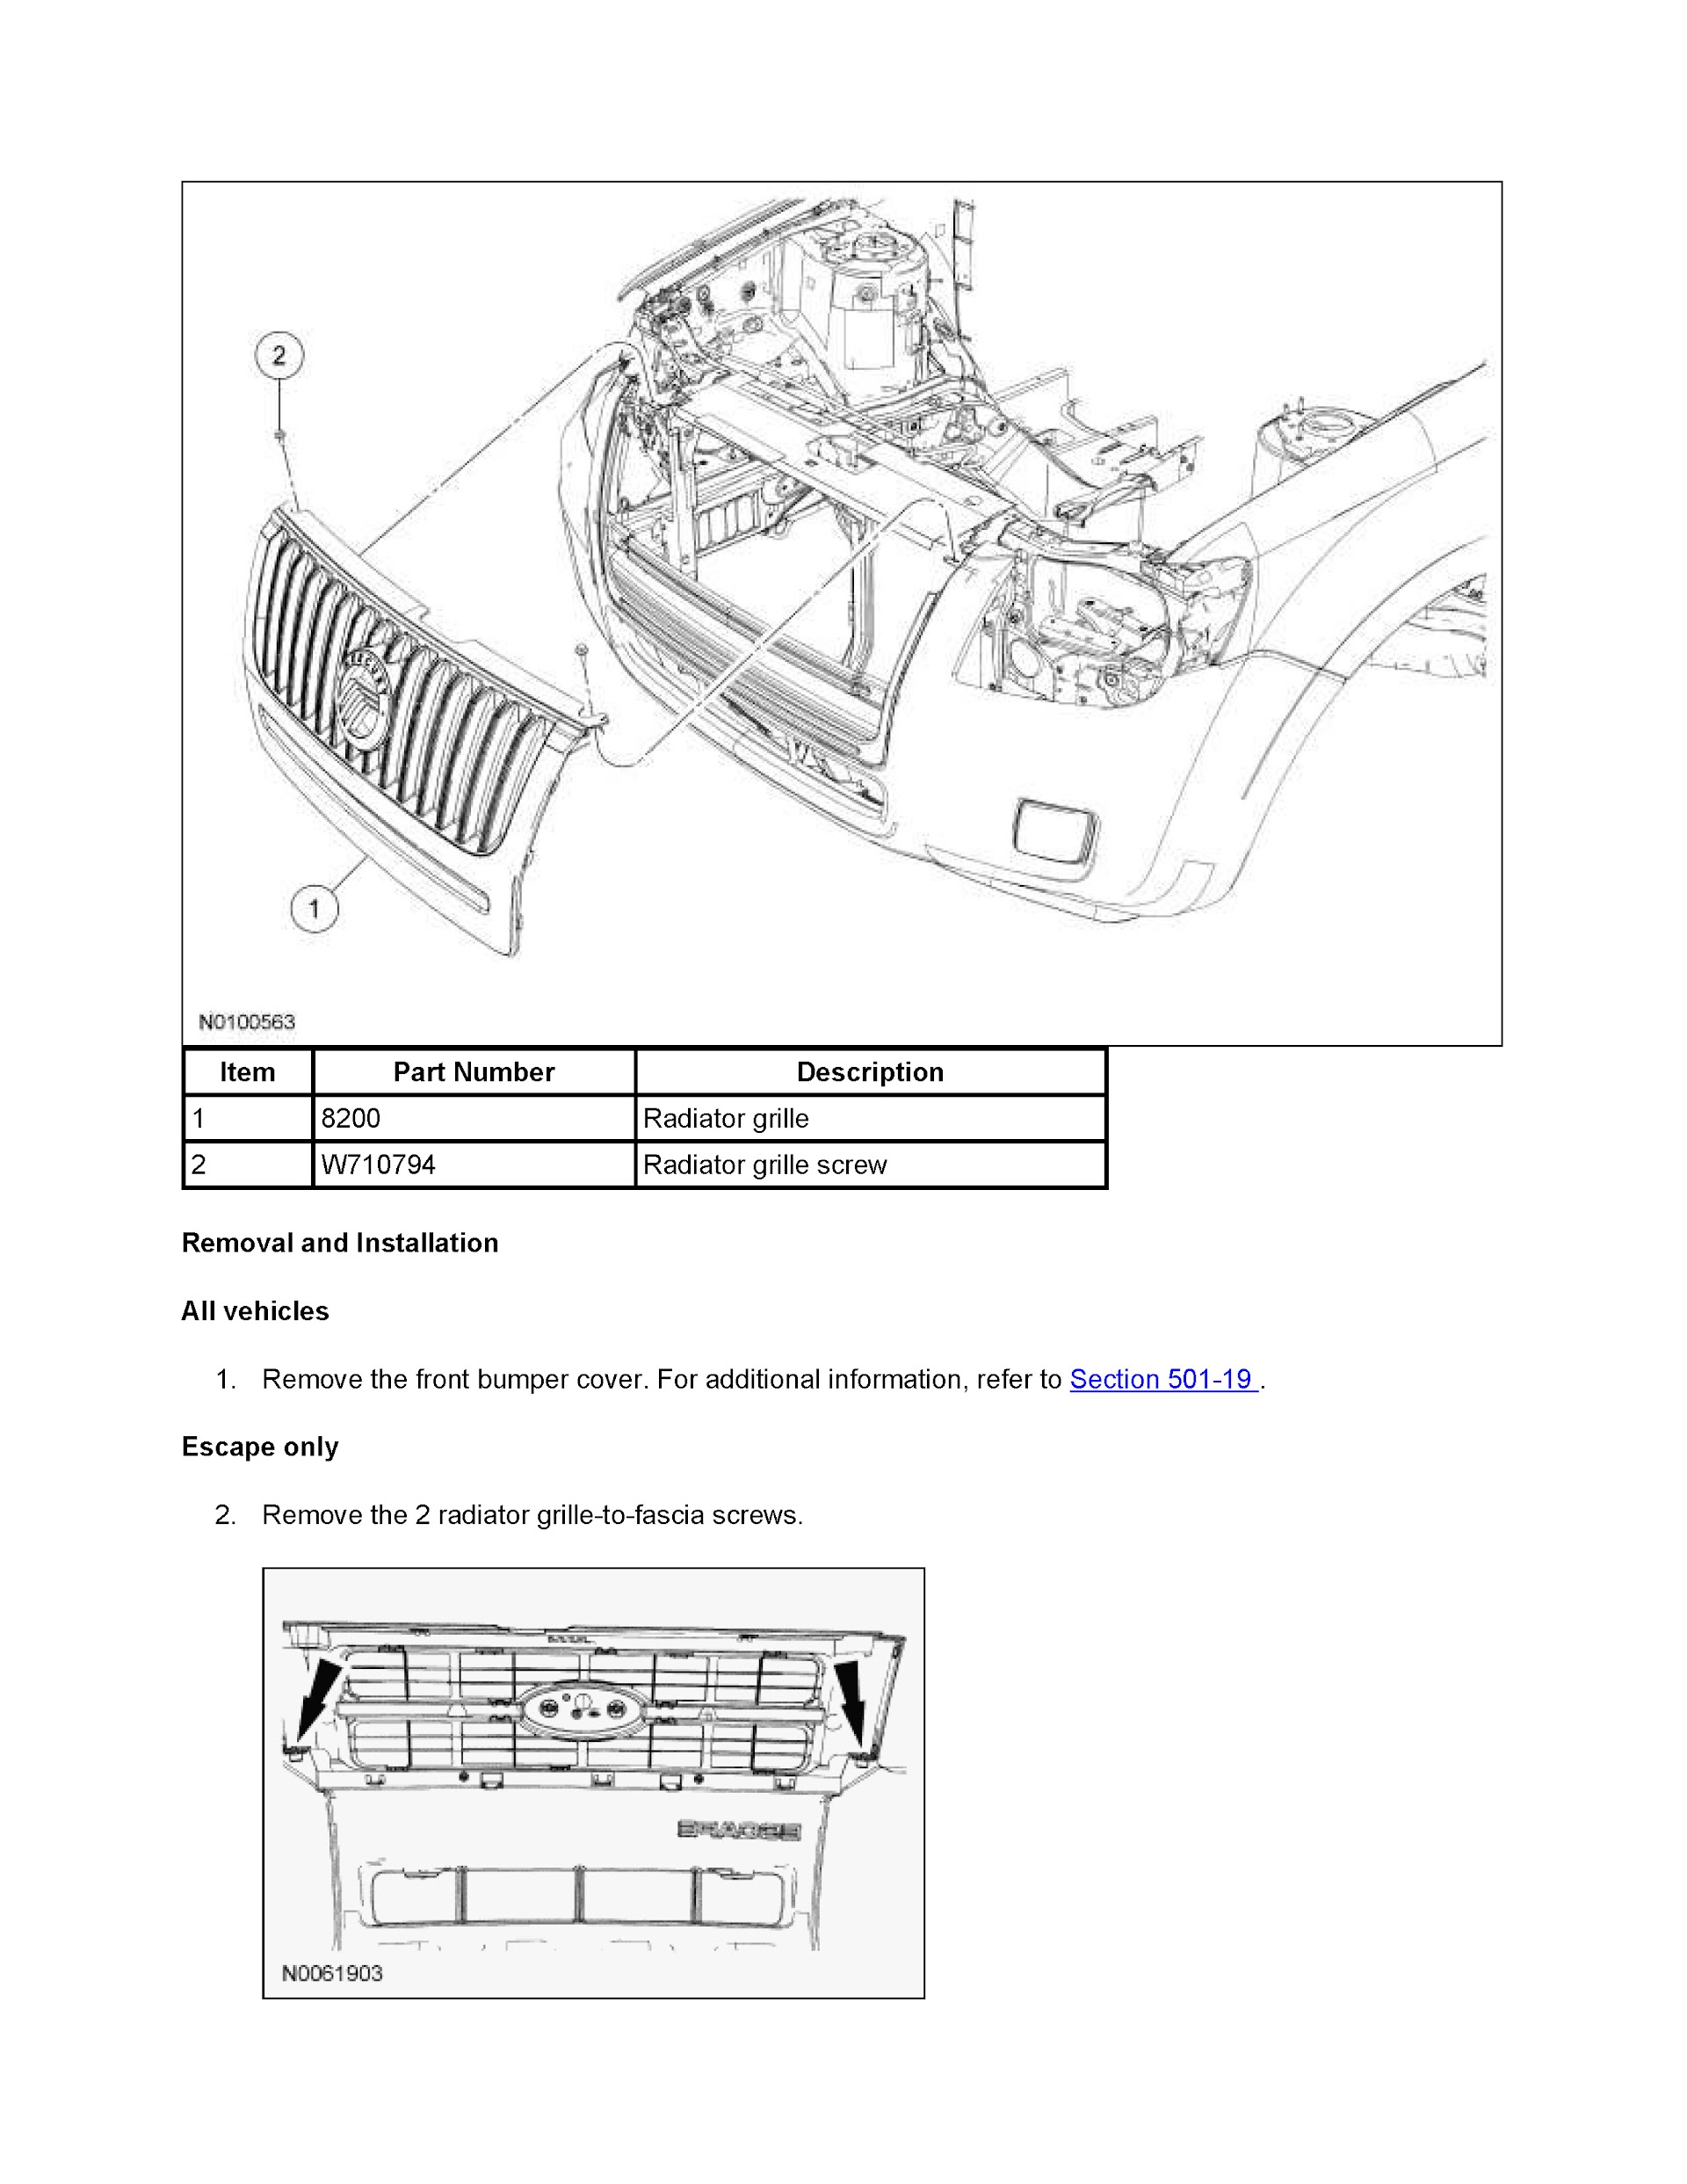 2011 Ford Escape Repair Manual Radiator Grill Removal and Installation